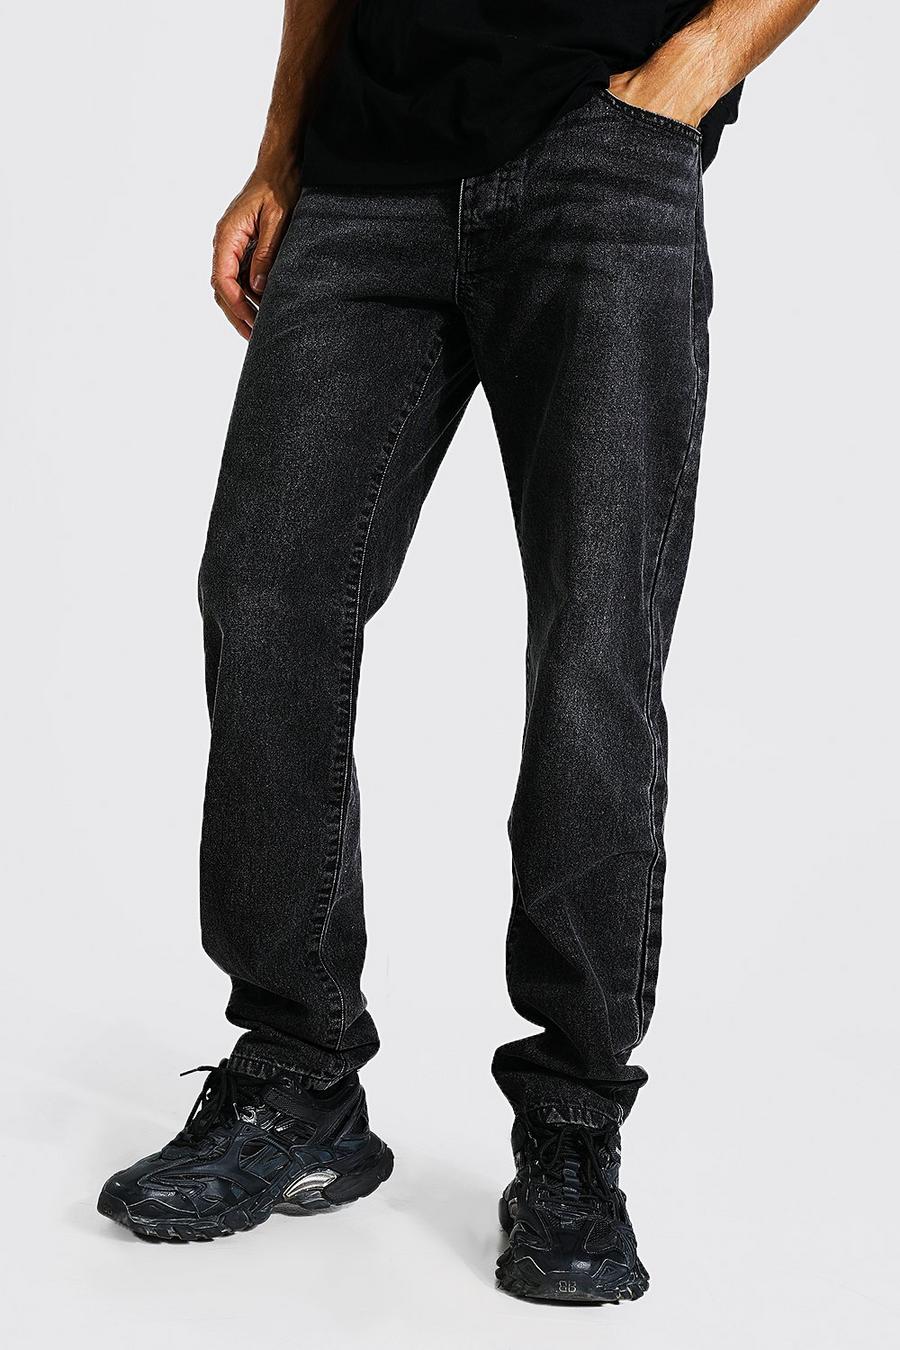 Tall lockere Jeans mit recyceltem Polyester, Charcoal gris